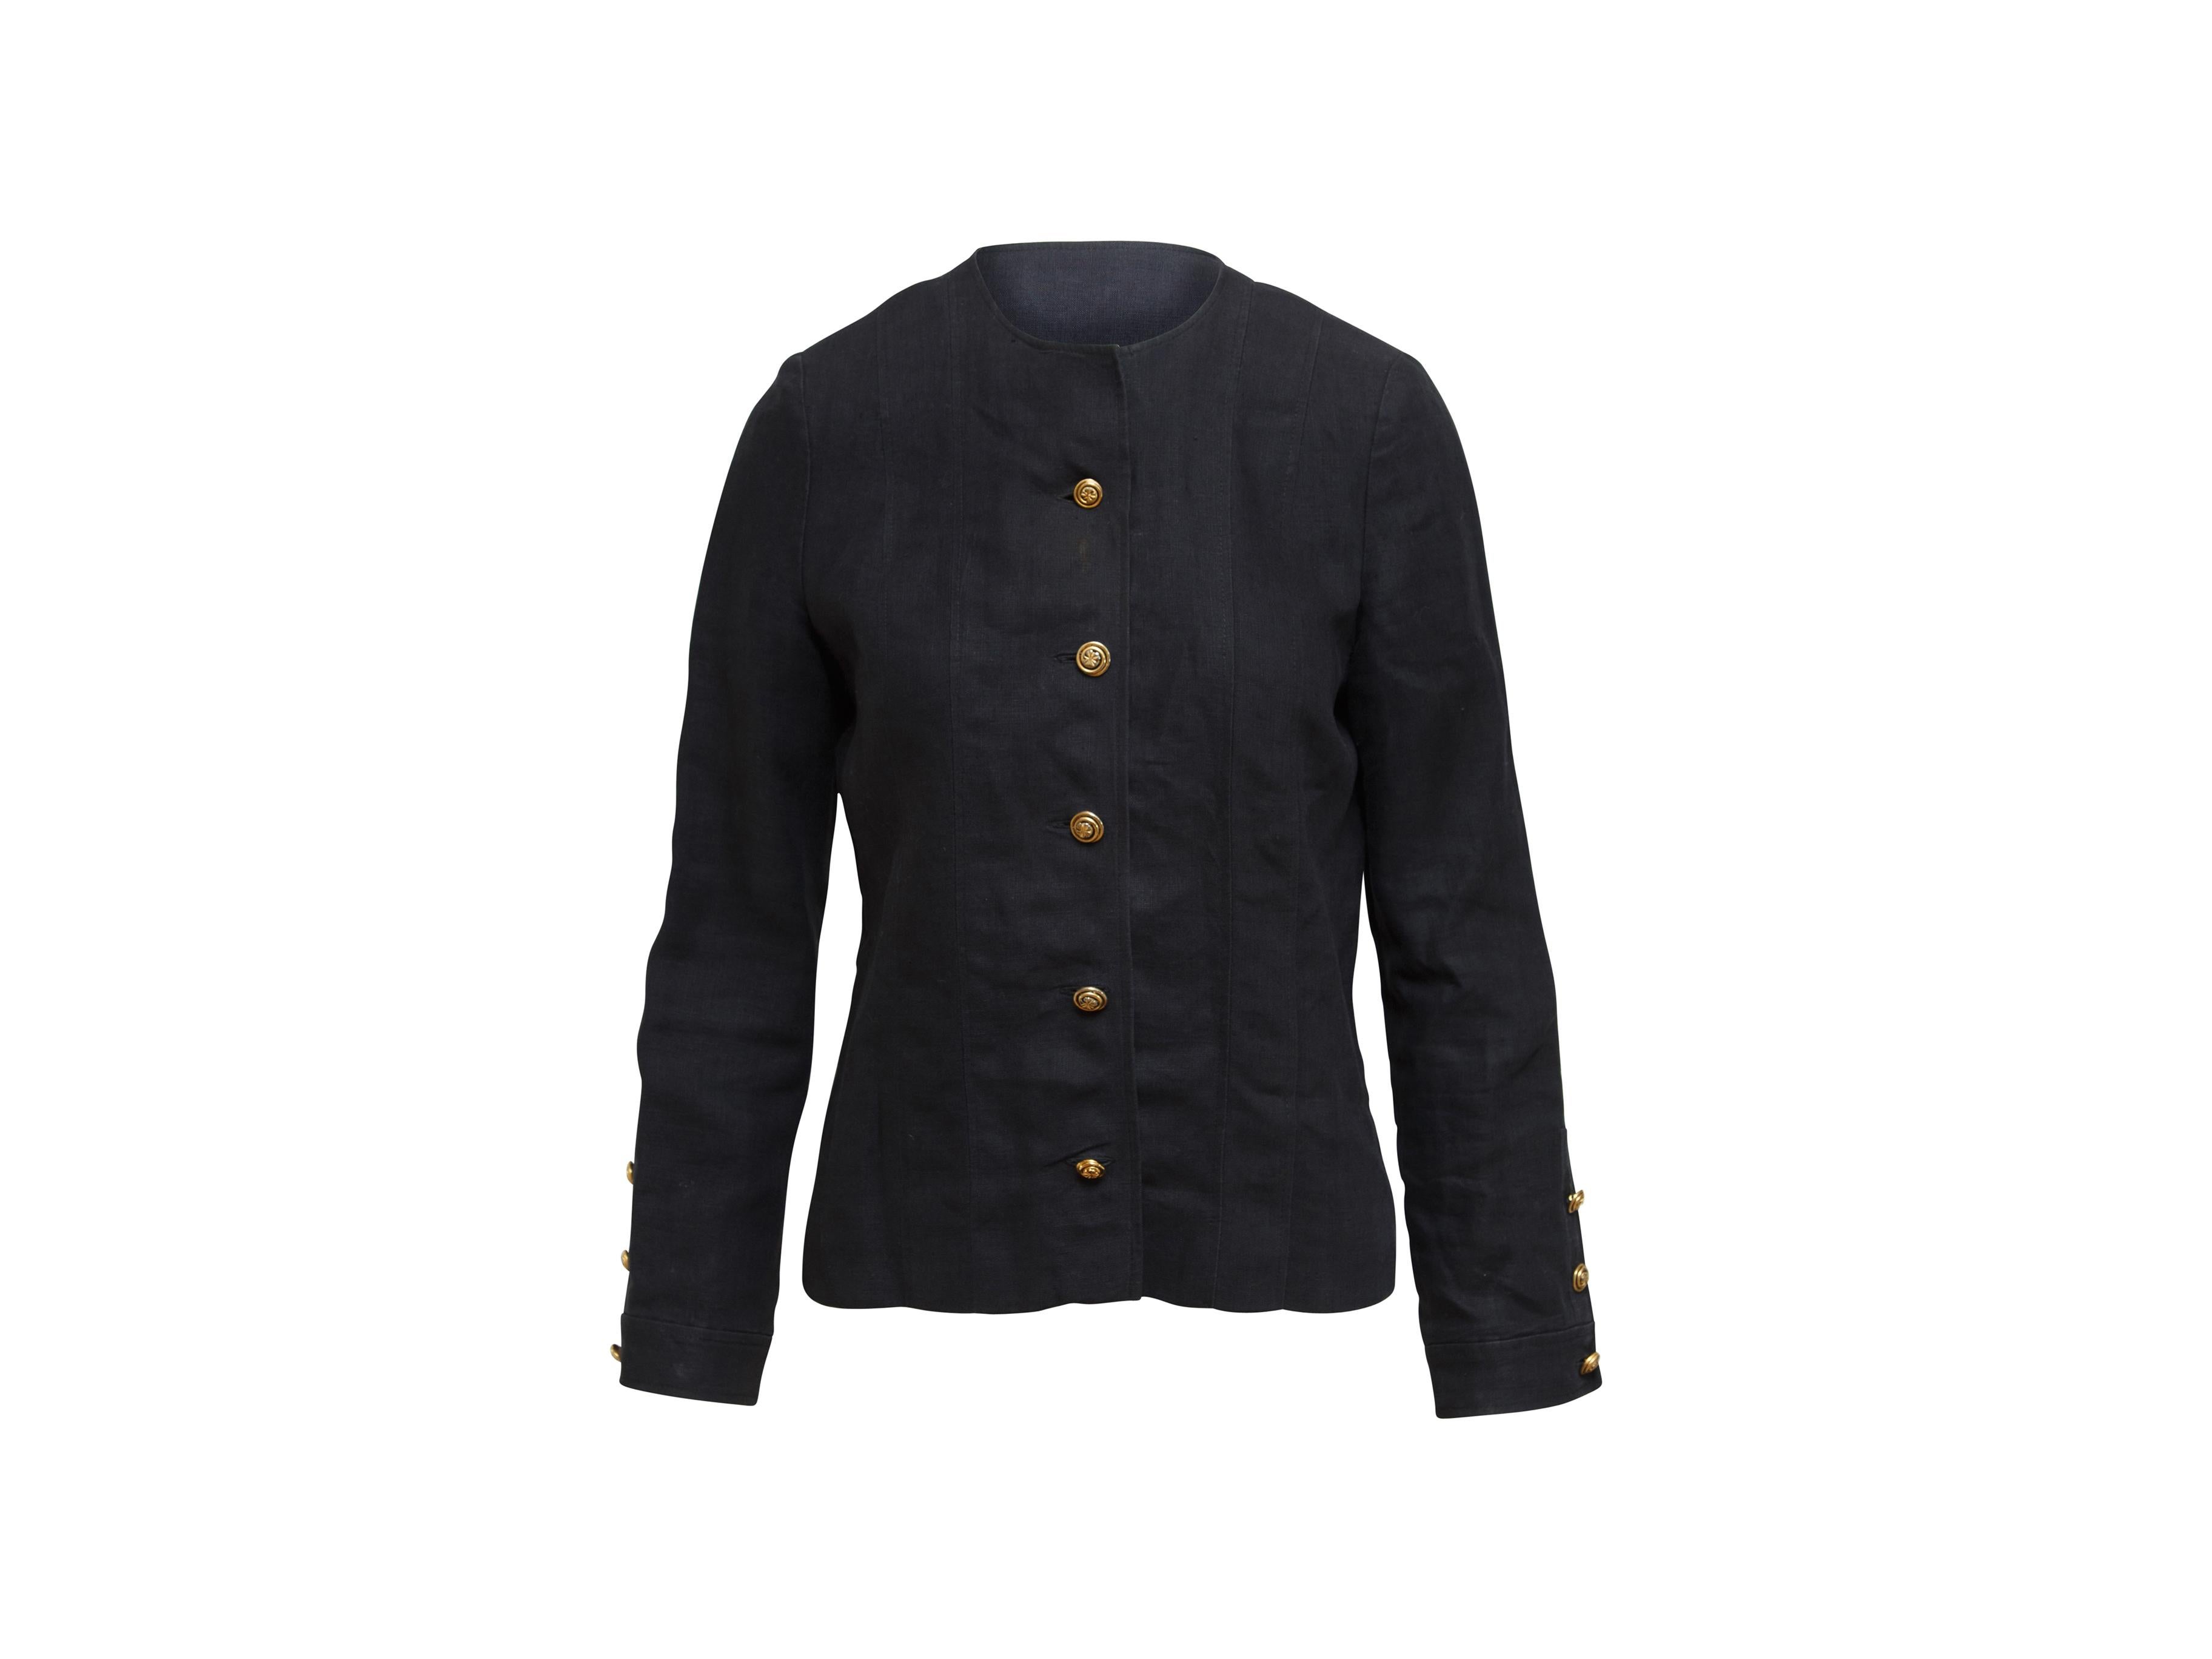 Product details:  Navy blue linen jacket by Chanel Boutique.  Crewneck.  Long sleeves.  Three-button cuffs.  Button-front closure.  36